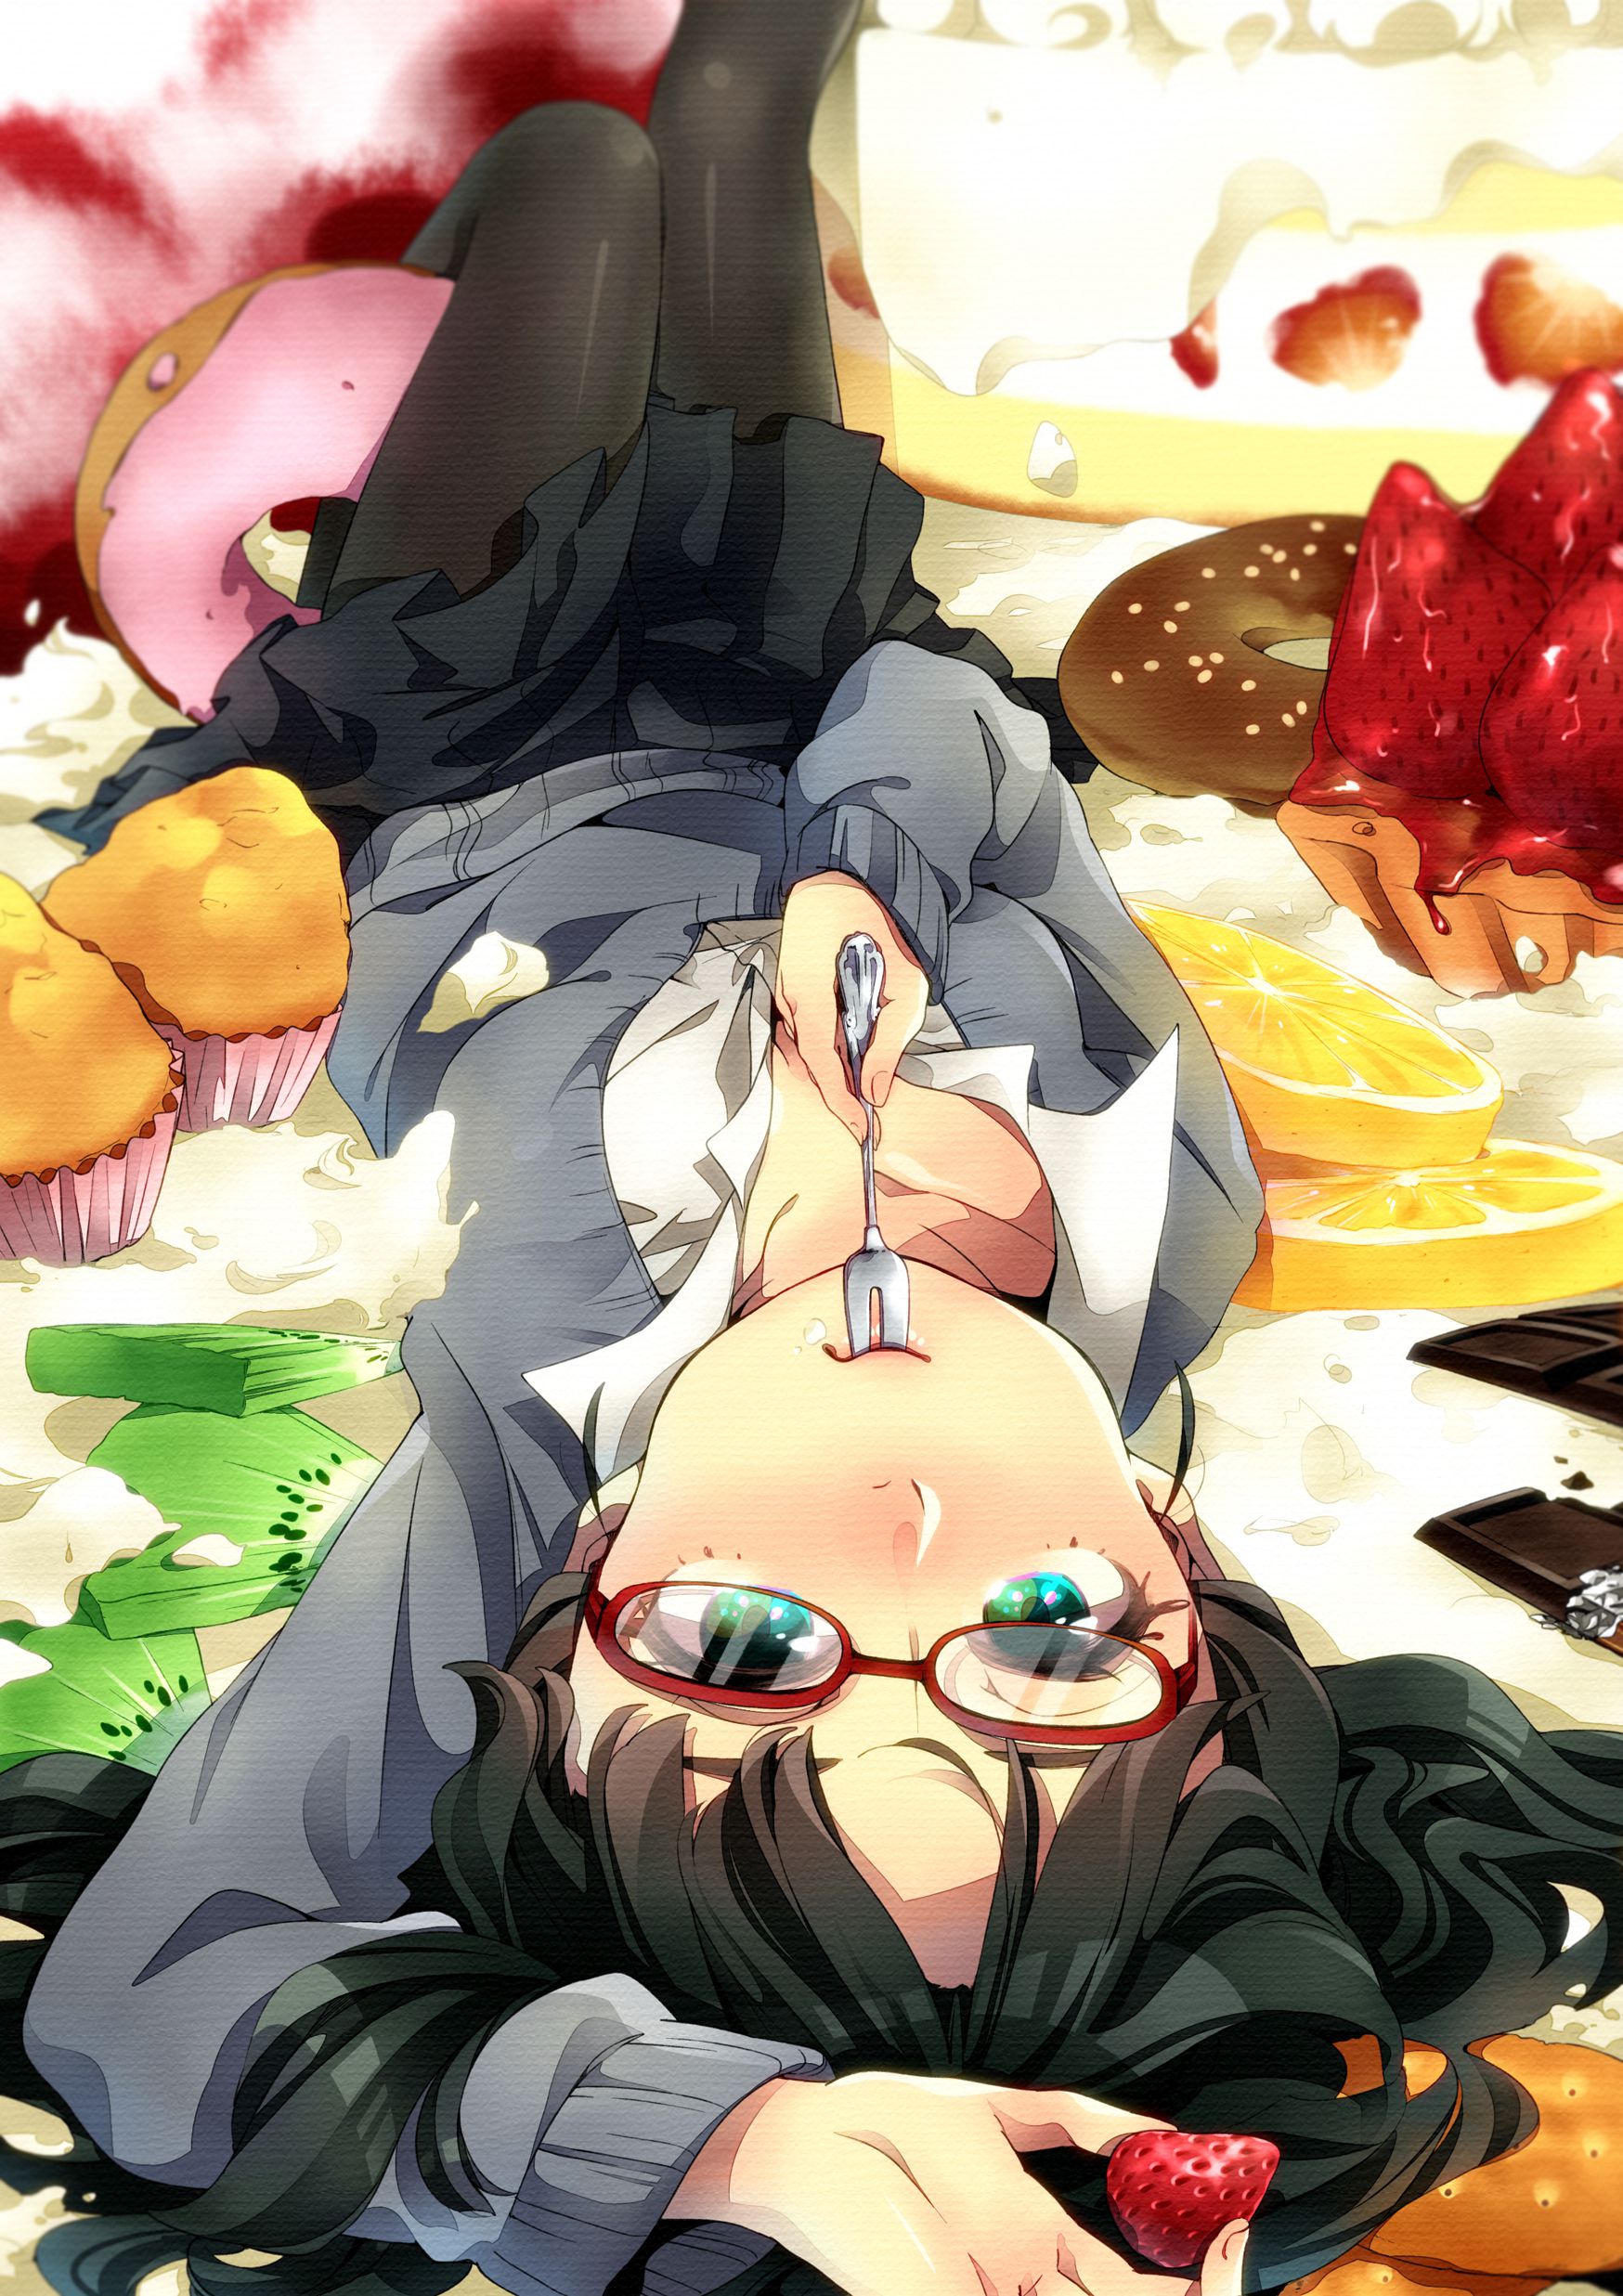 The second glasses daughter image which cannot help attracting my heart 10